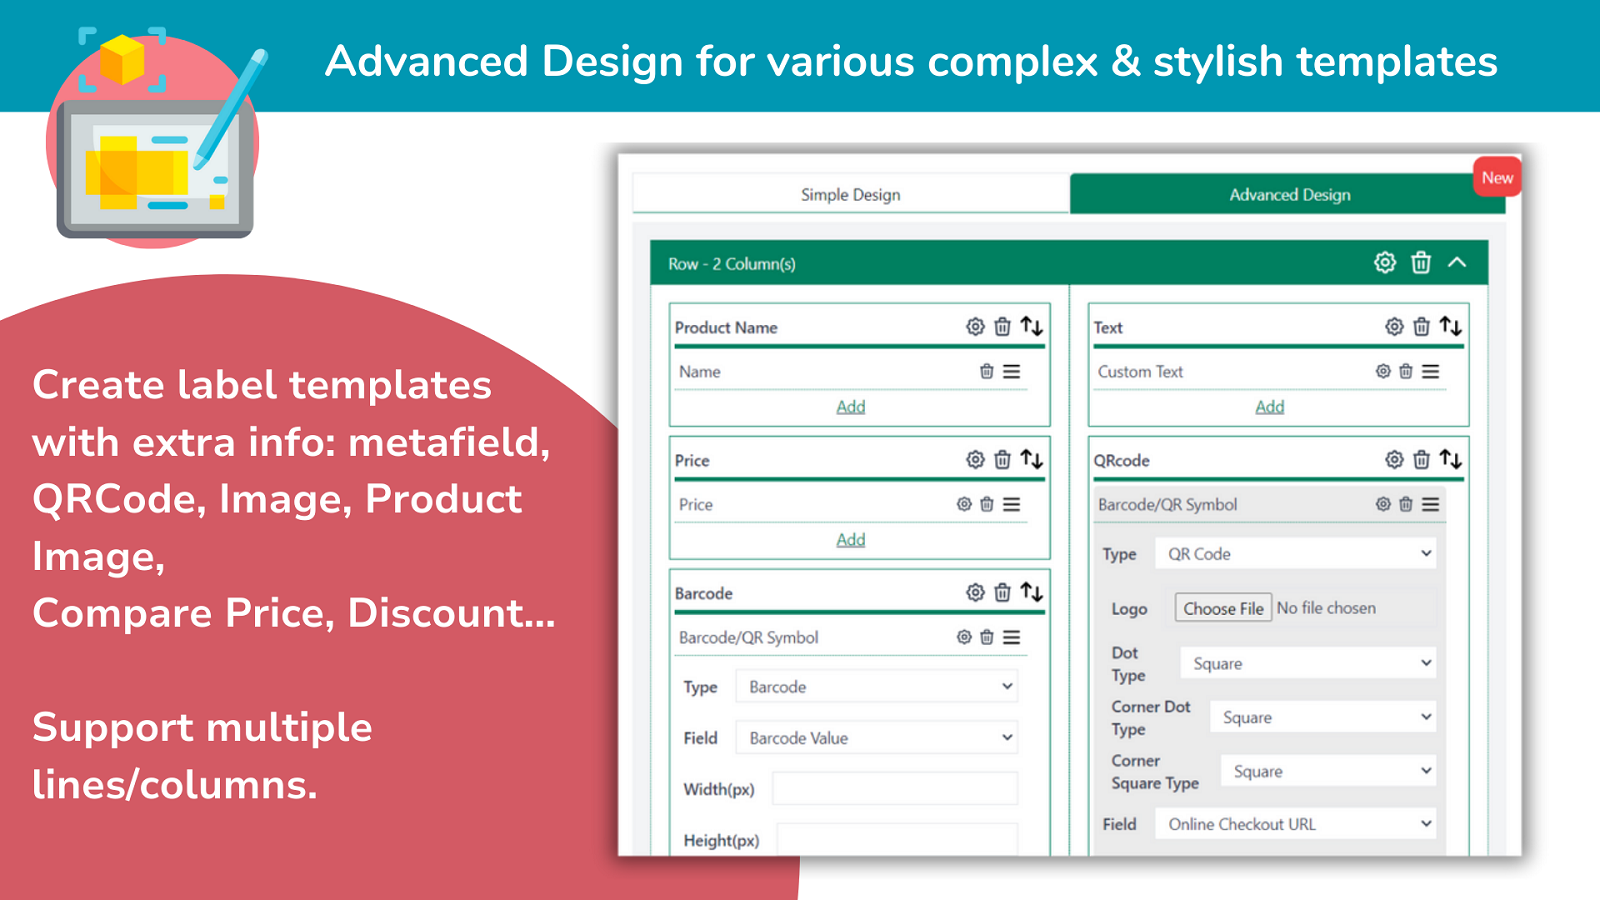 Advanced Design for various complex & stylish templates